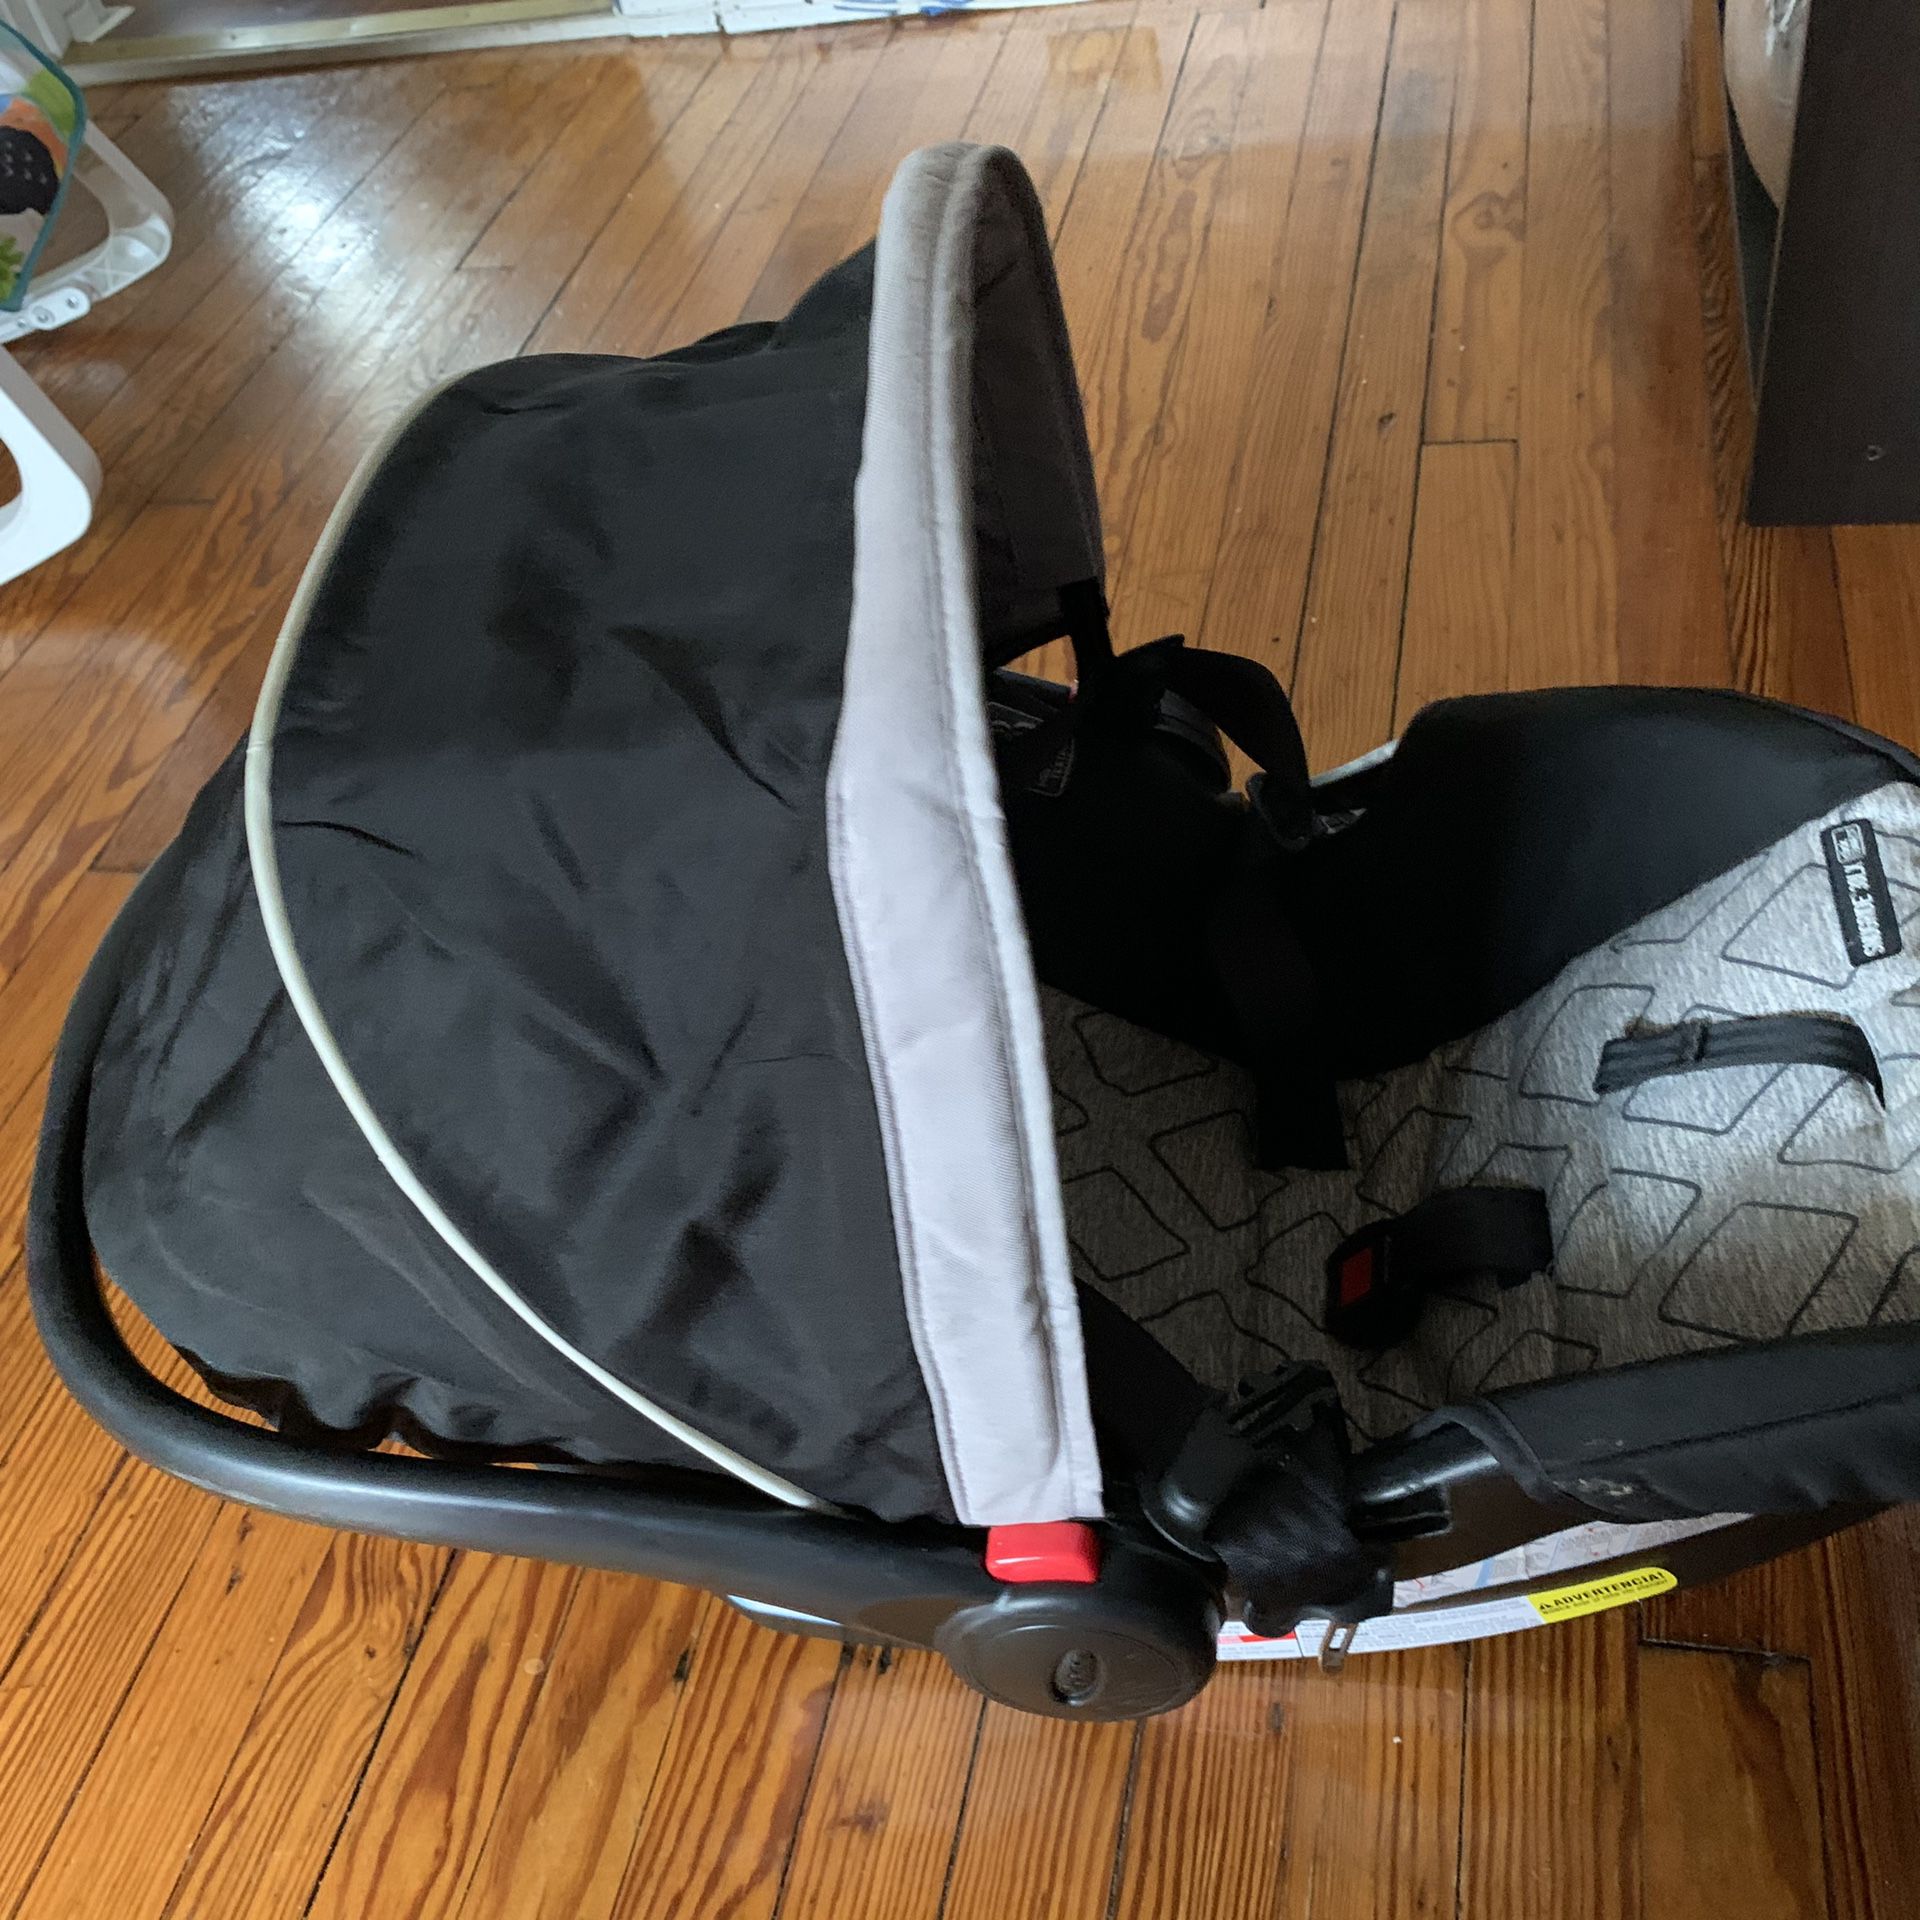 Graco snugride 30lx car seat and base